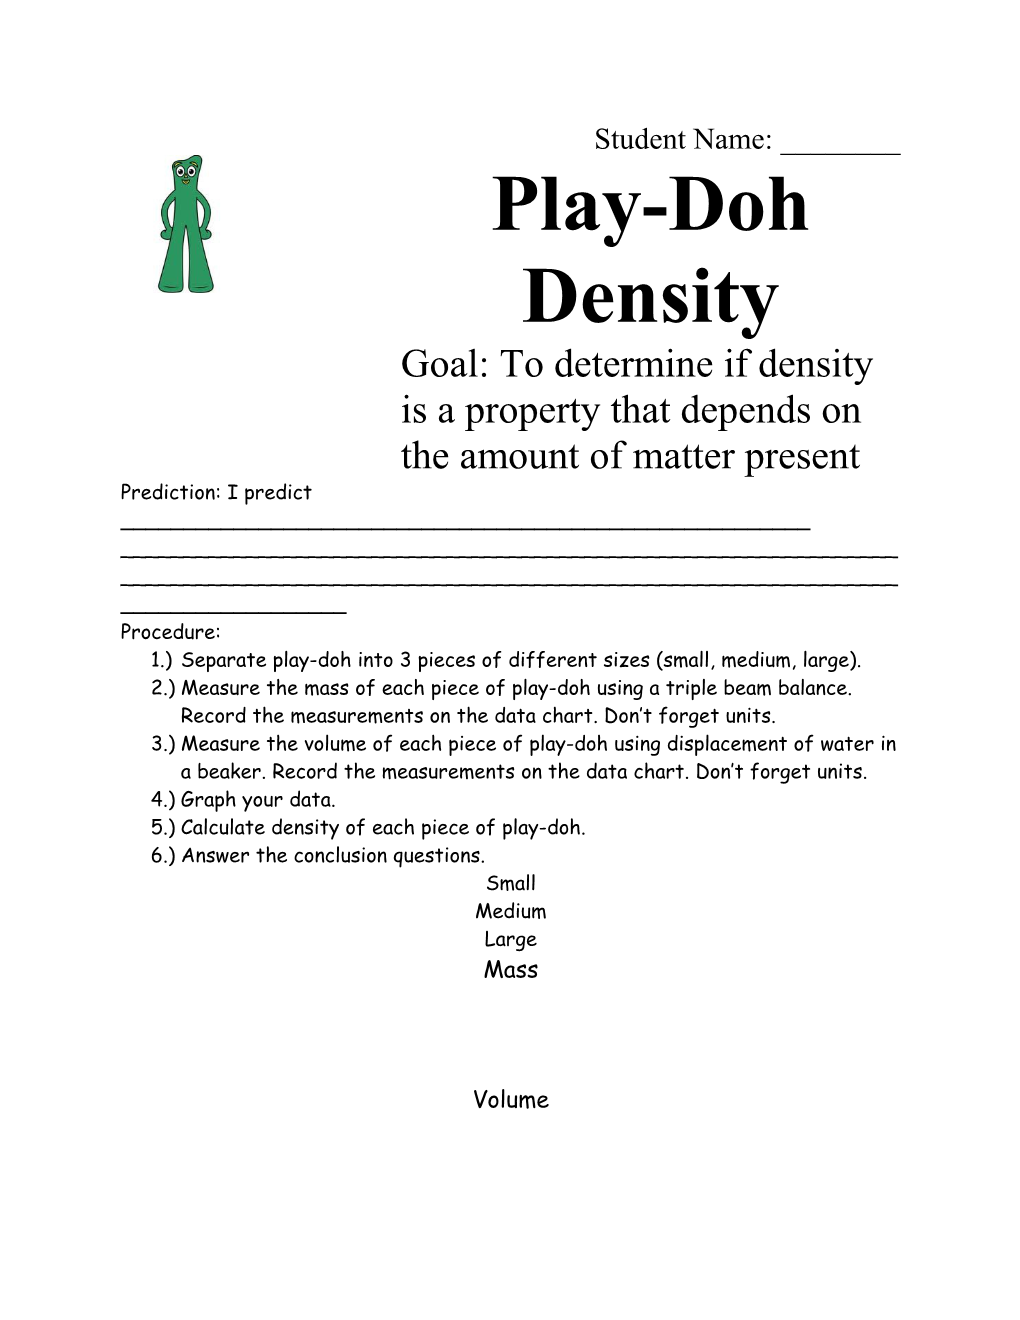 Goal: to Determine If Density Is a Property That Depends on the Amount of Matter Present